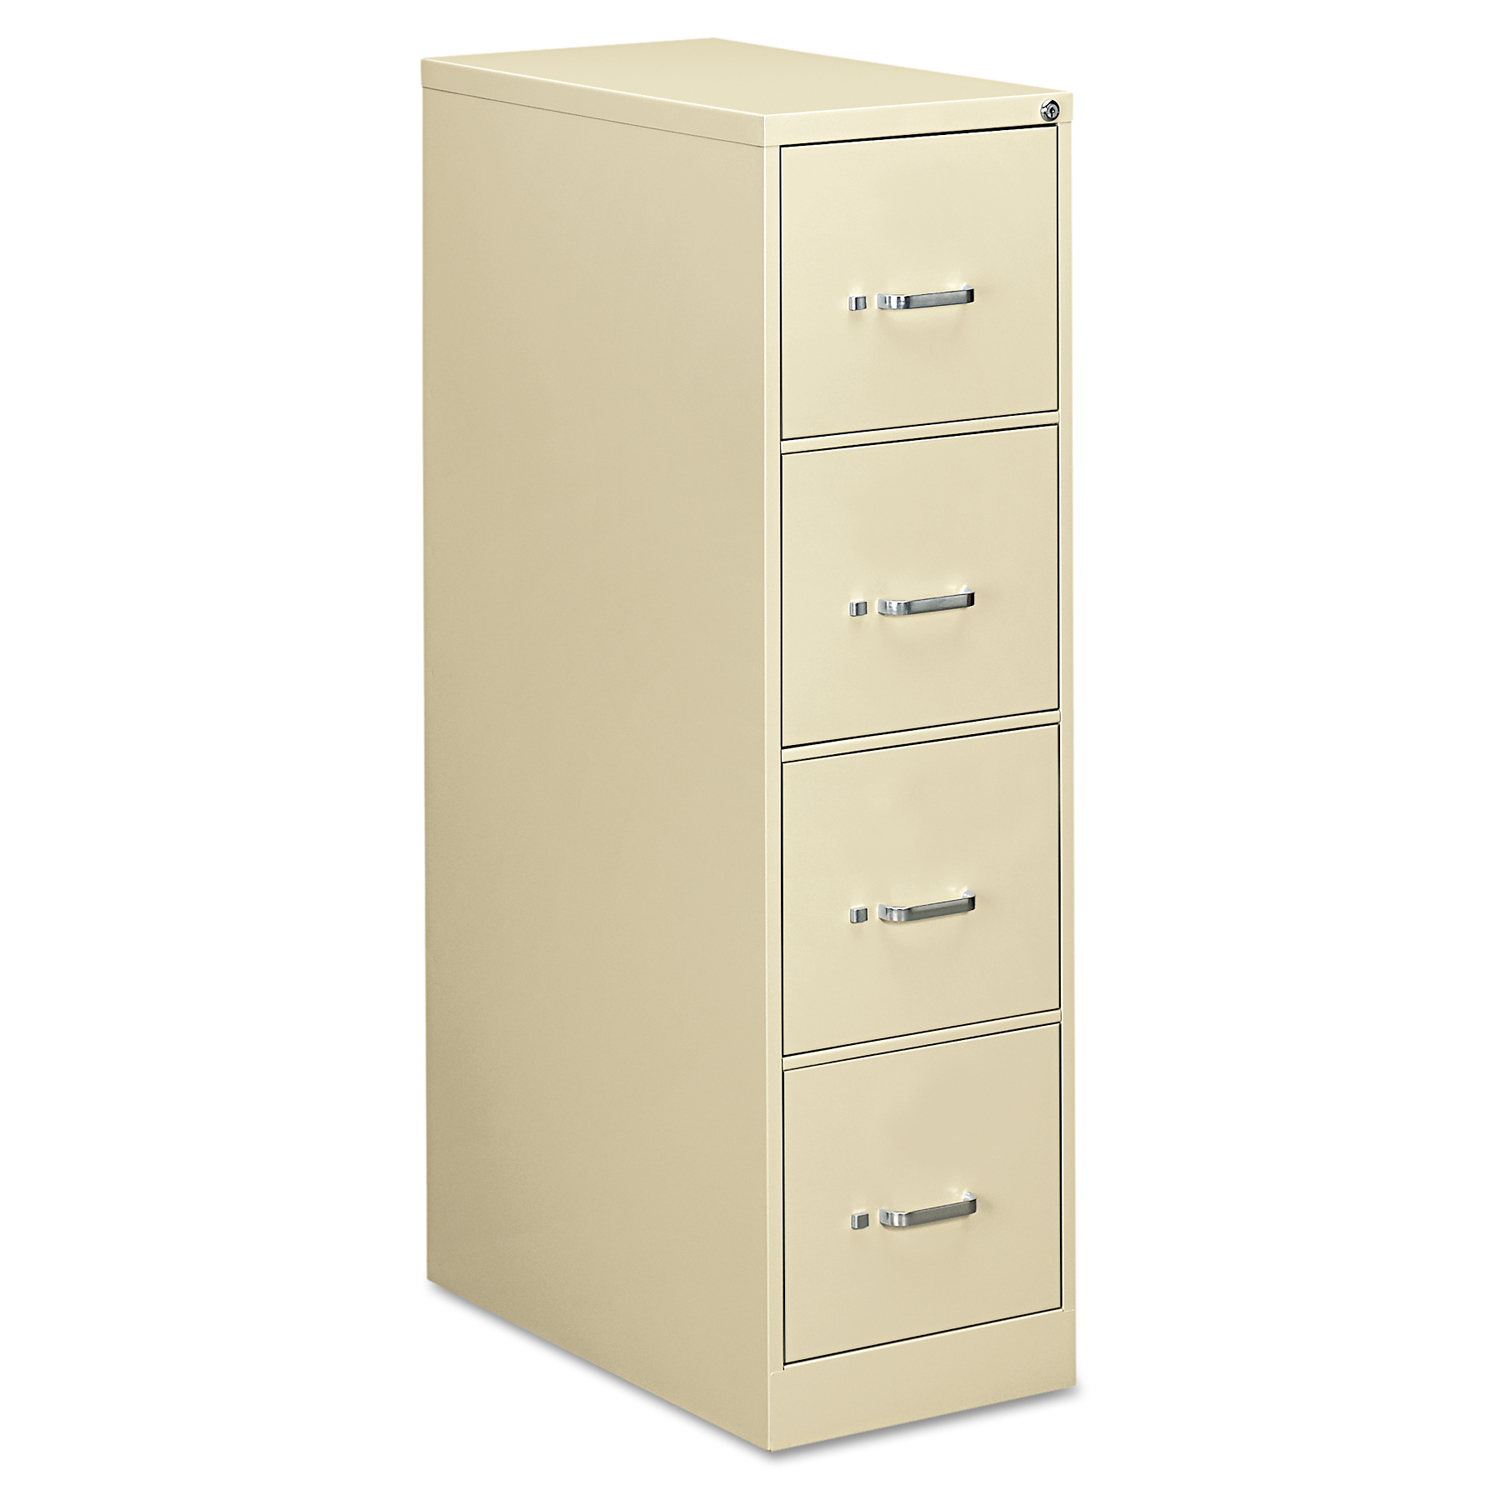 Four-Drawer Economy Vertical File, 15w x 26-1/2d x 52h, Putty